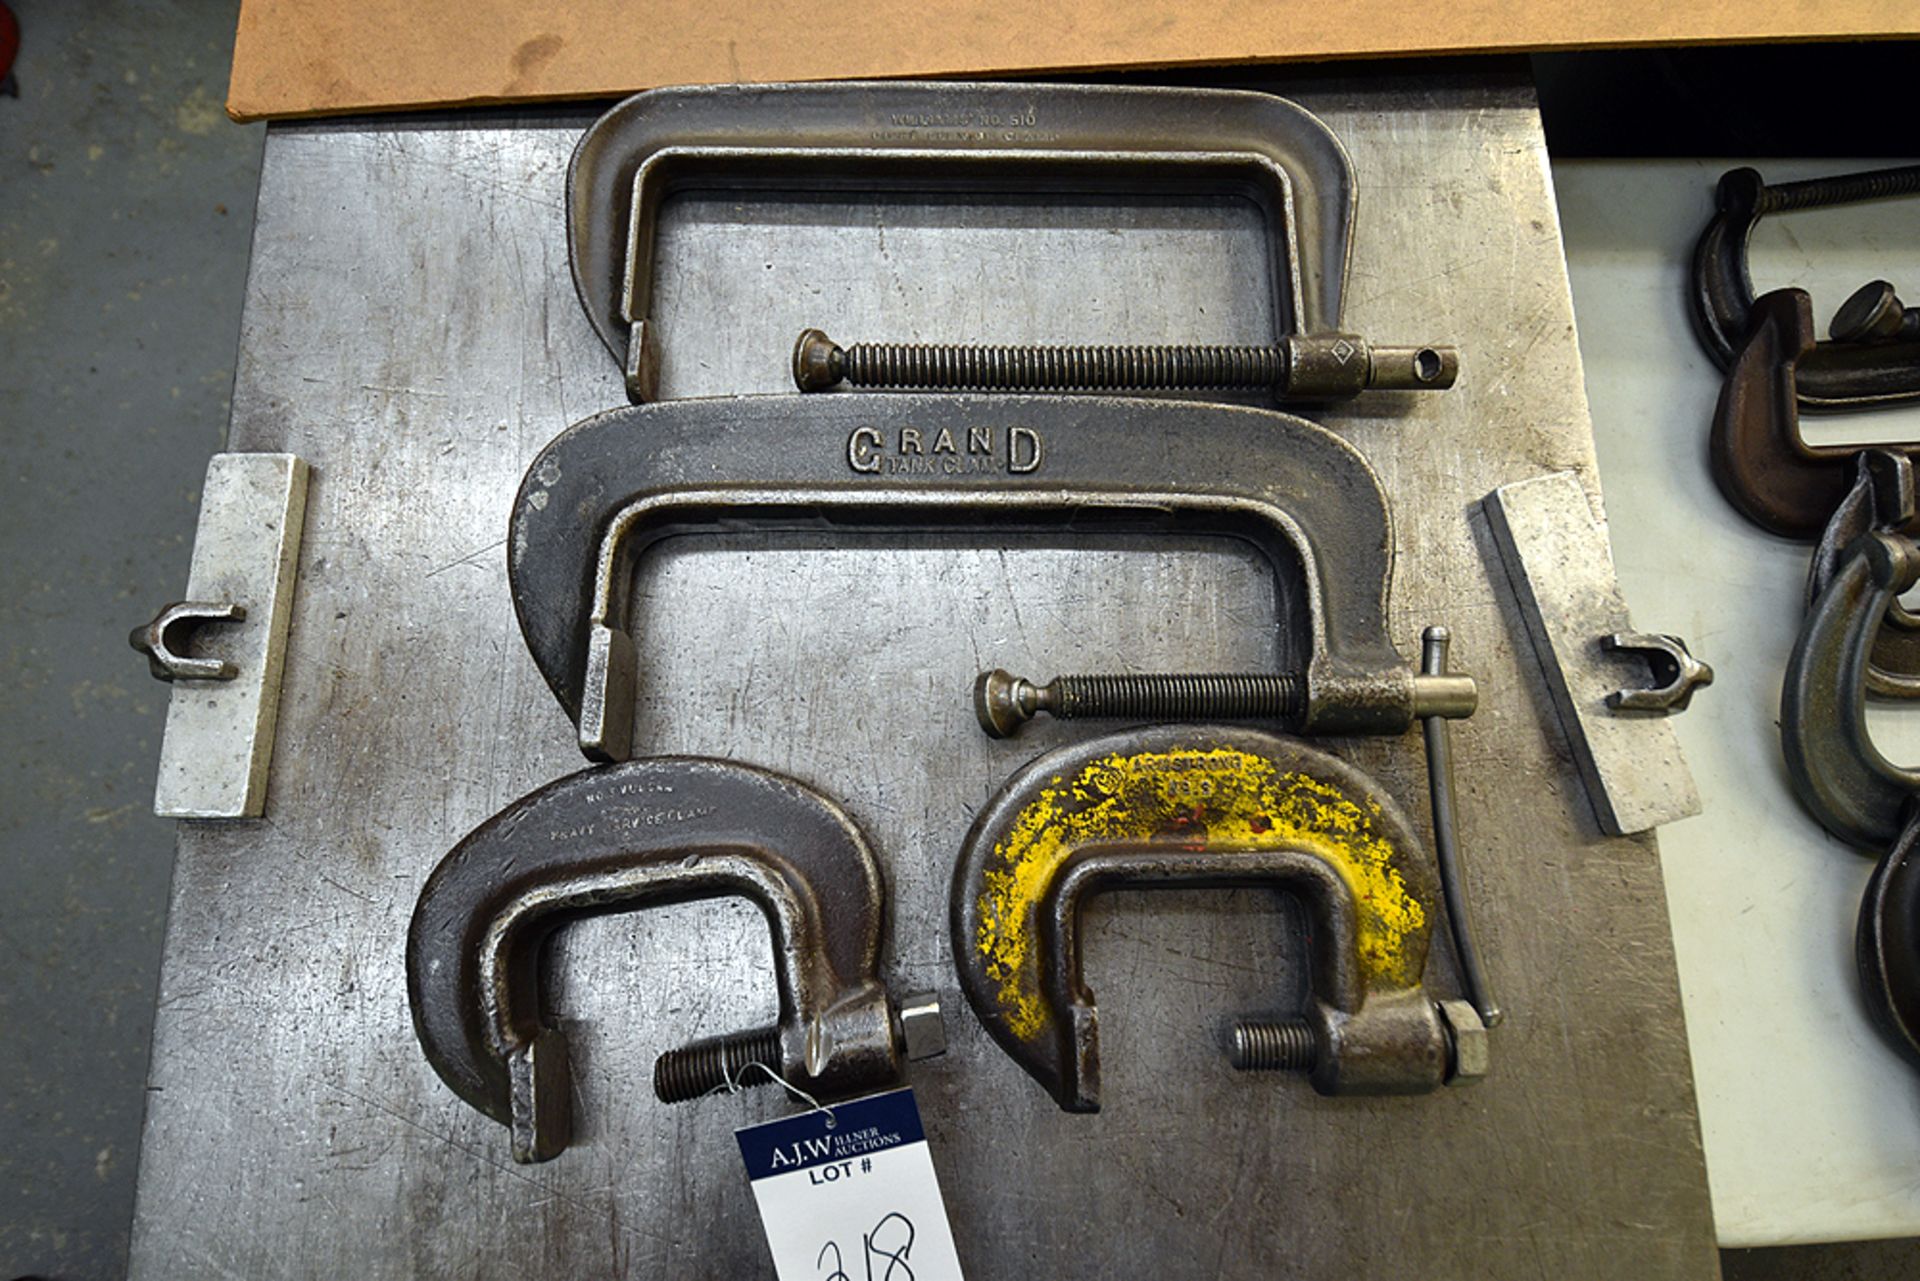 {each} Ass't "C" Clamps: (1) Williams 10", (1) Grand 10", (1) Armstrong 3", and (1) Vulcan 3"